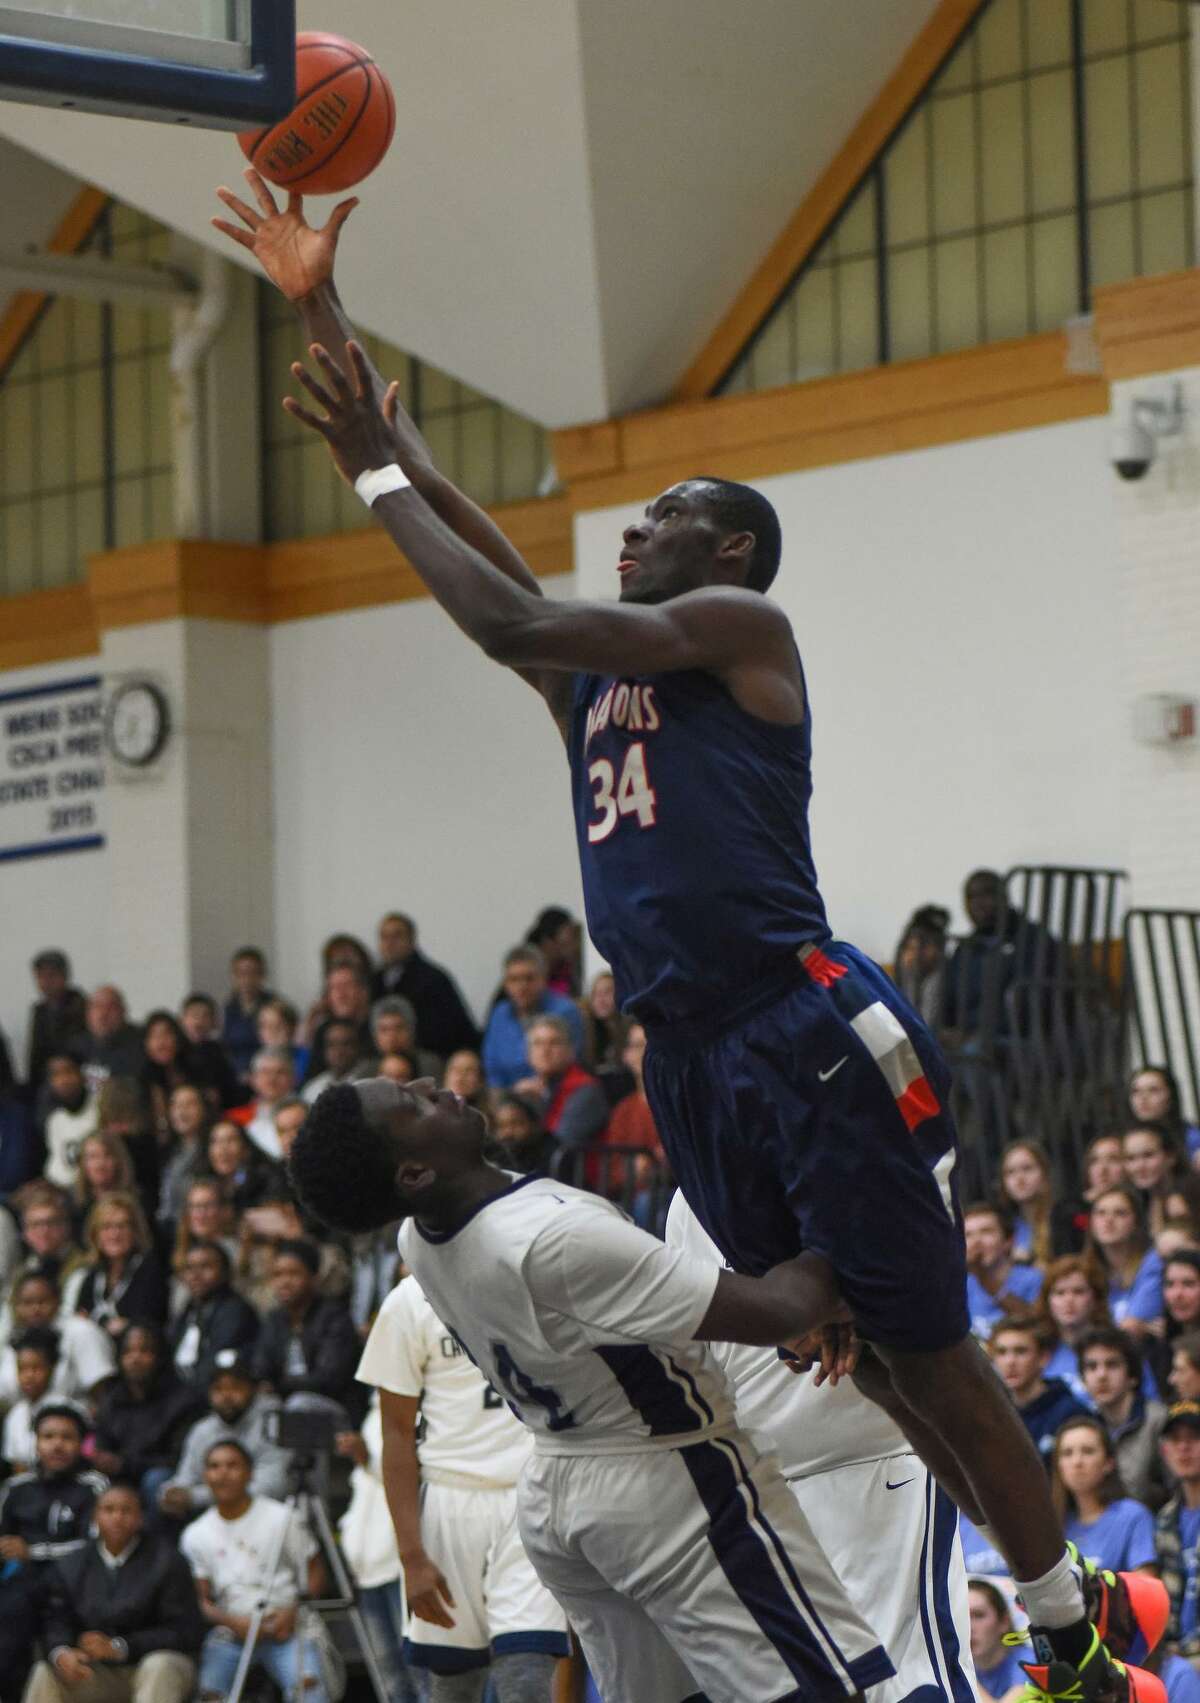 Greens Farms Academy's Sunday Okeke of Darien soars over an opponent from Capital Harbor Prep in the GFA's 87-74 victory at home Friday, Jan. 27. Okeke had 11 points on the night.